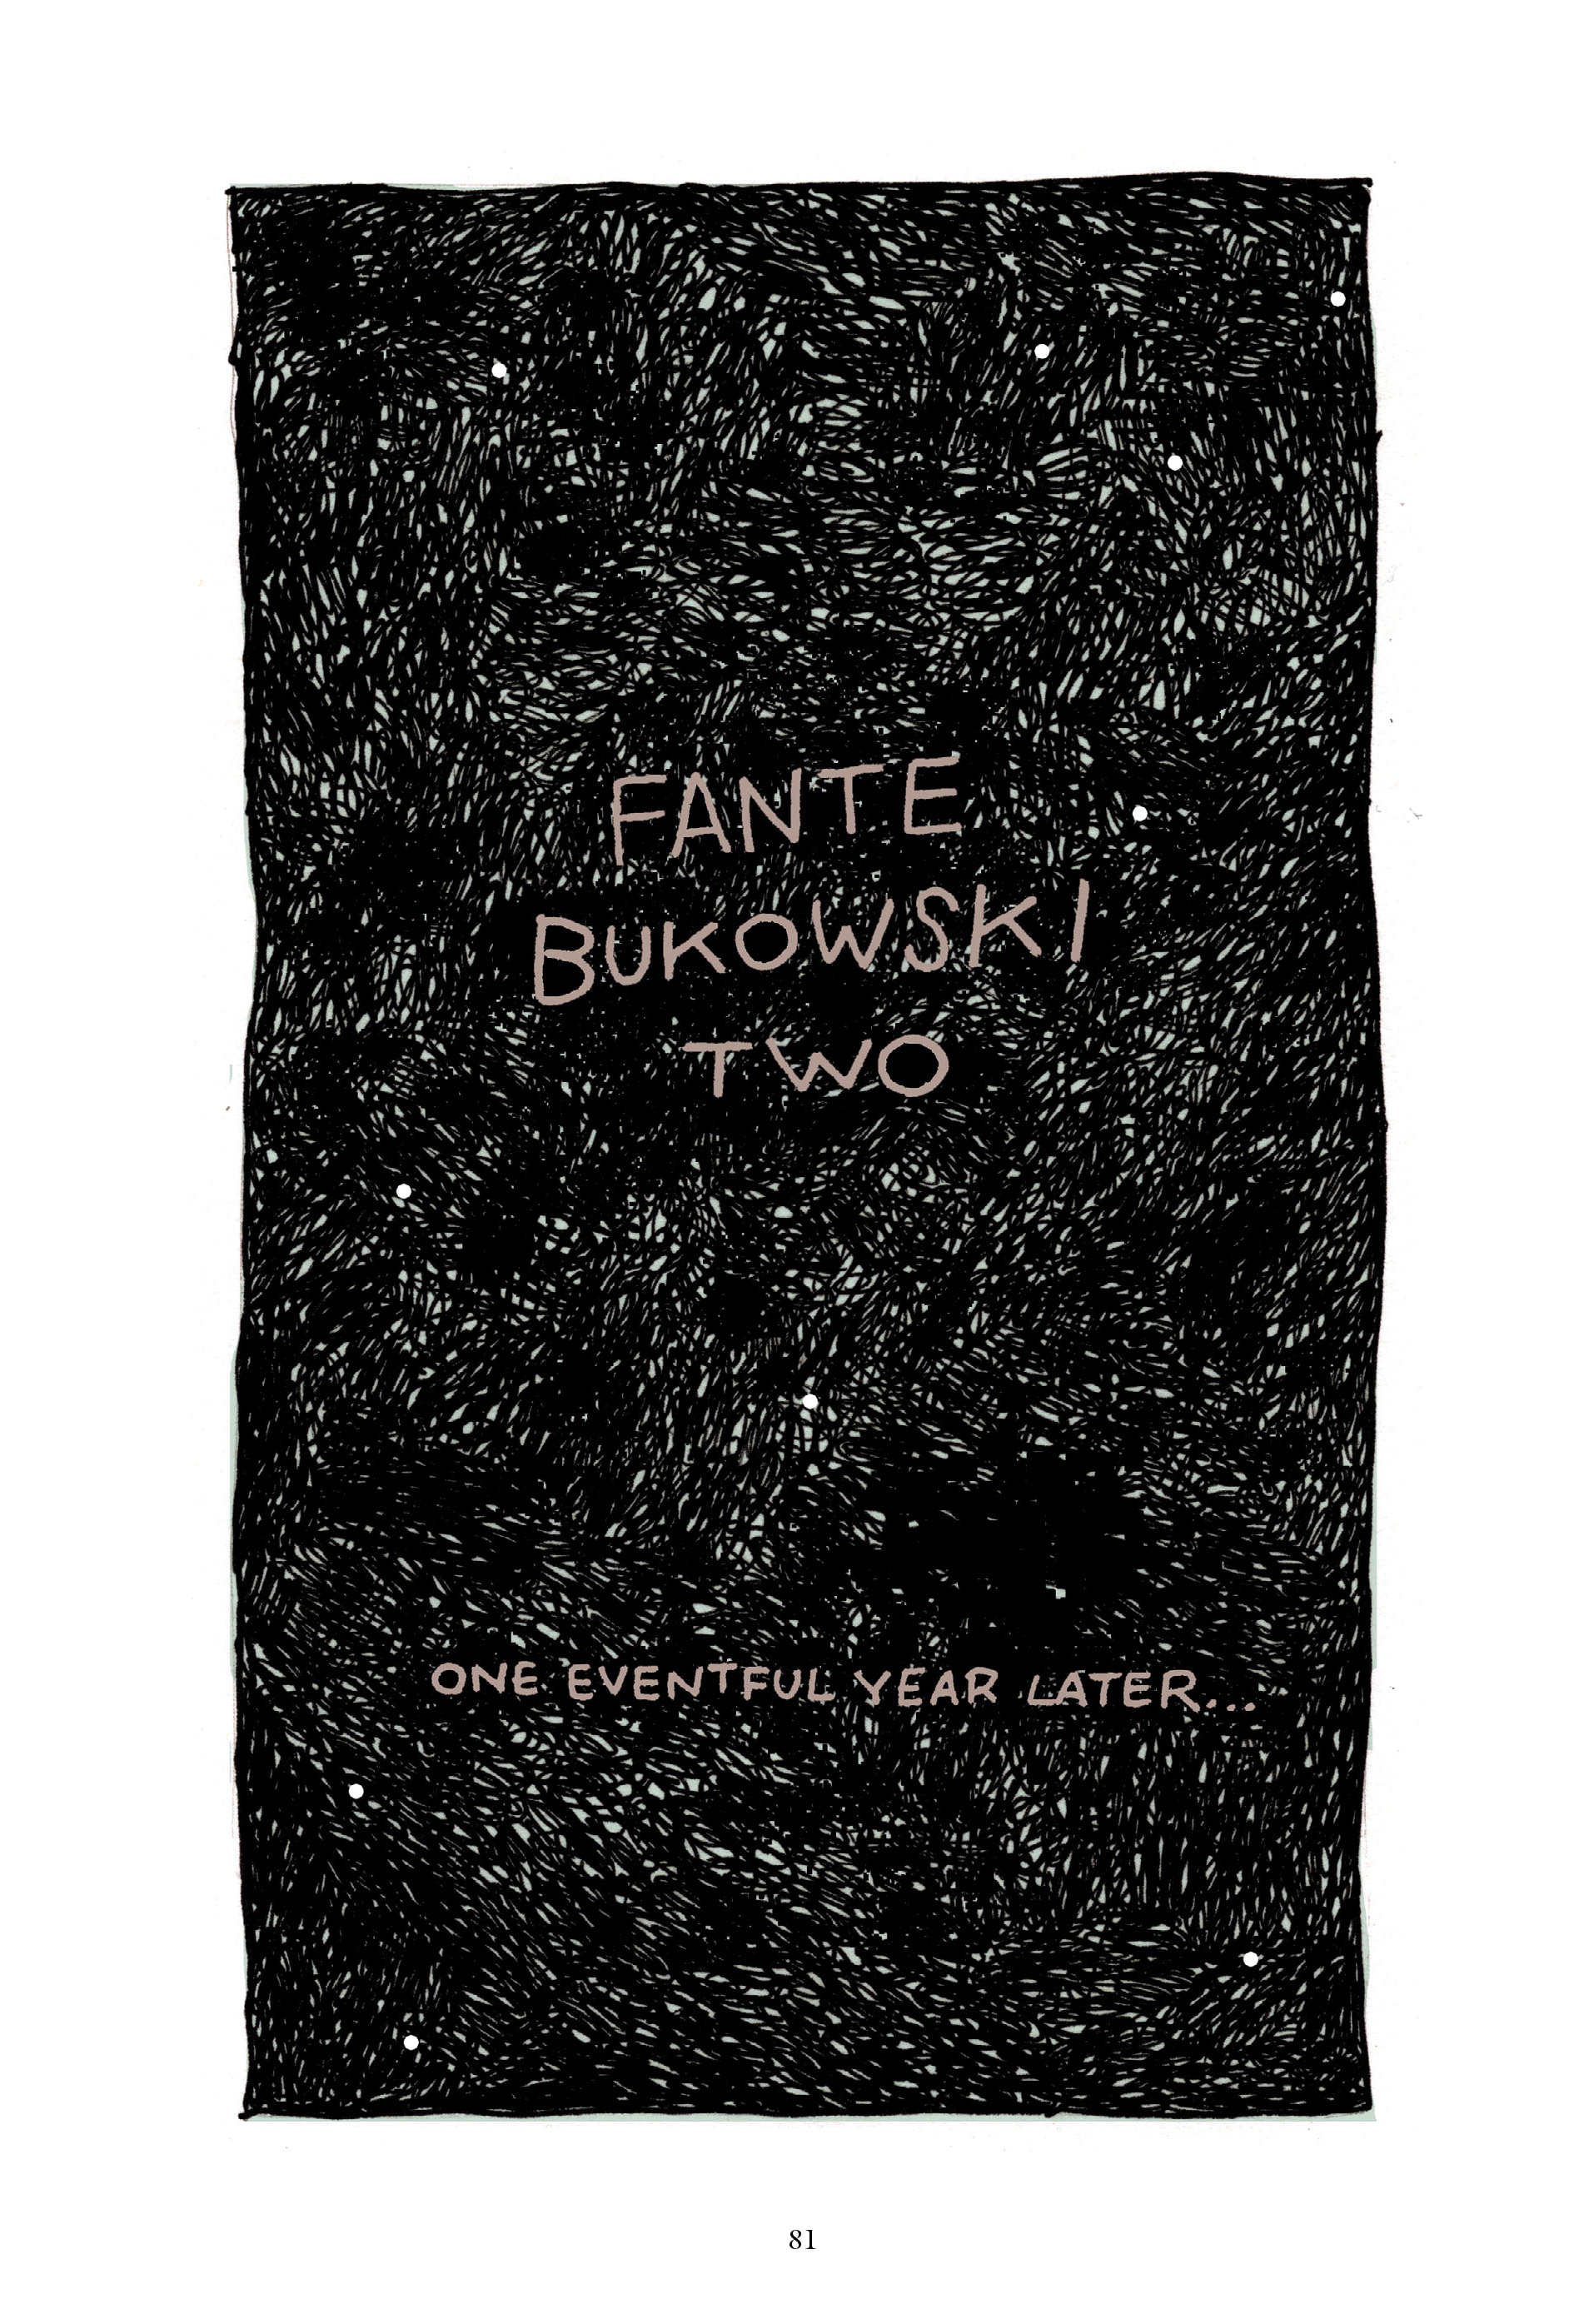 Read online The Complete Works of Fante Bukowski comic -  Issue # TPB (Part 1) - 79